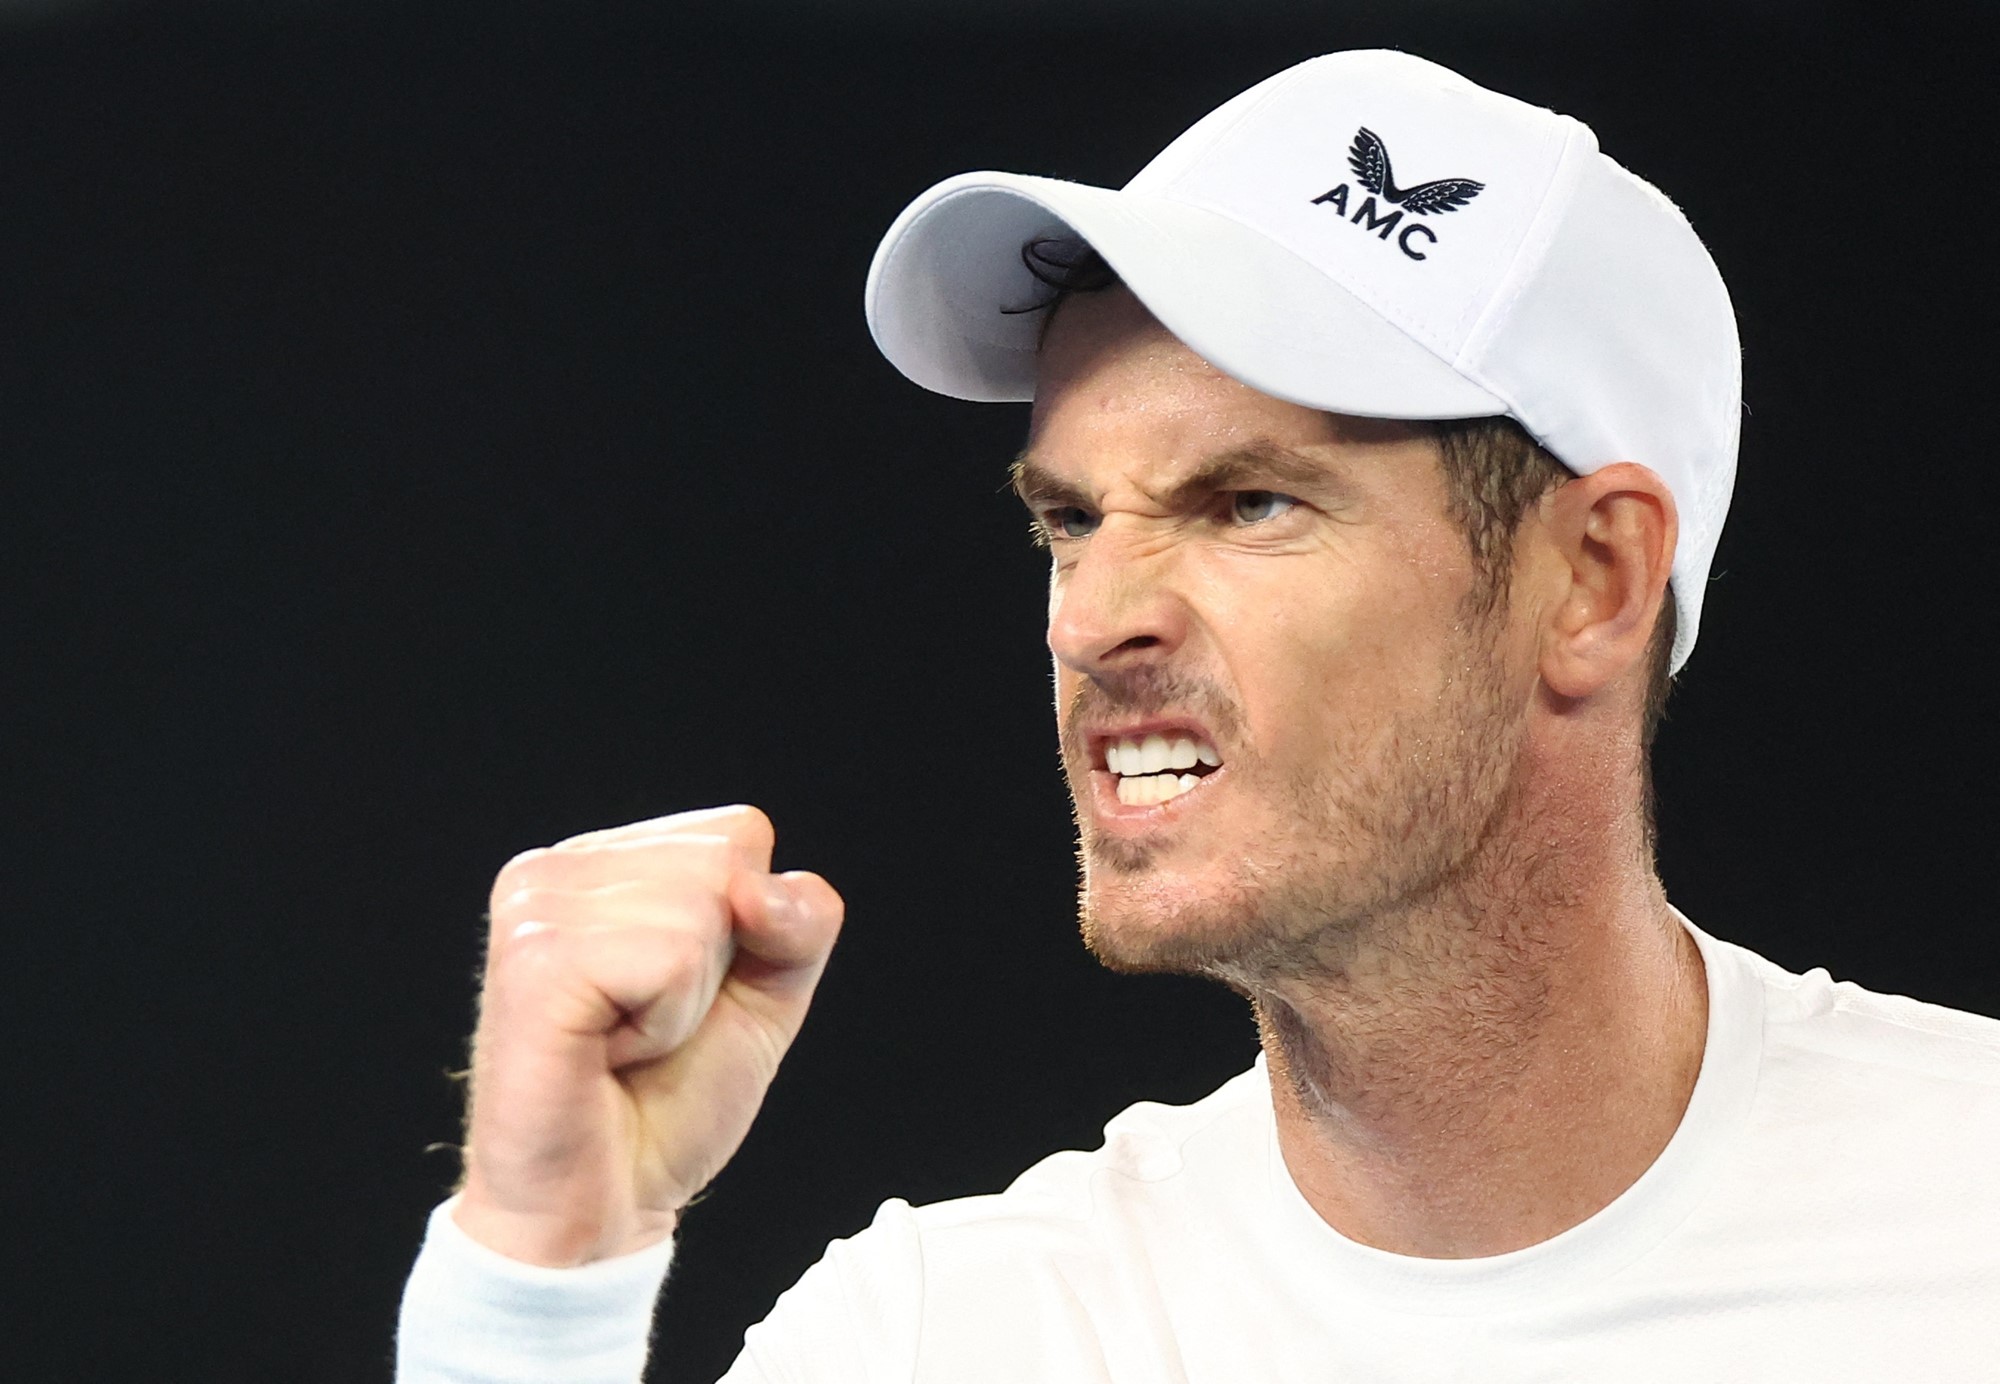 Andy Murray clenches his fist